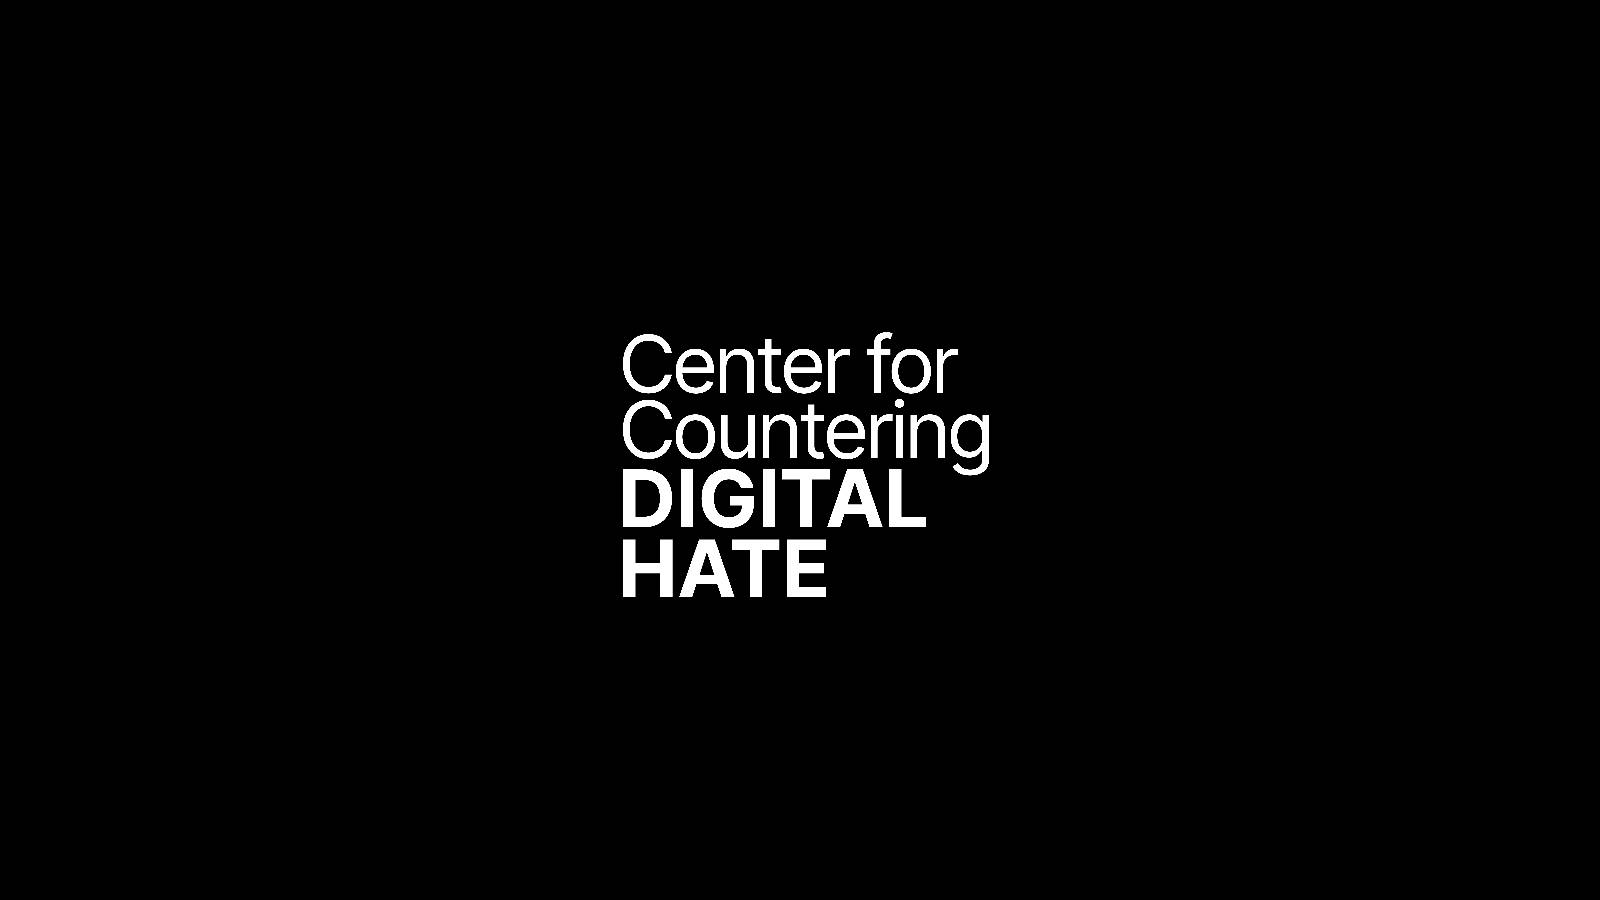 ​The Center for Countering Digital Hate